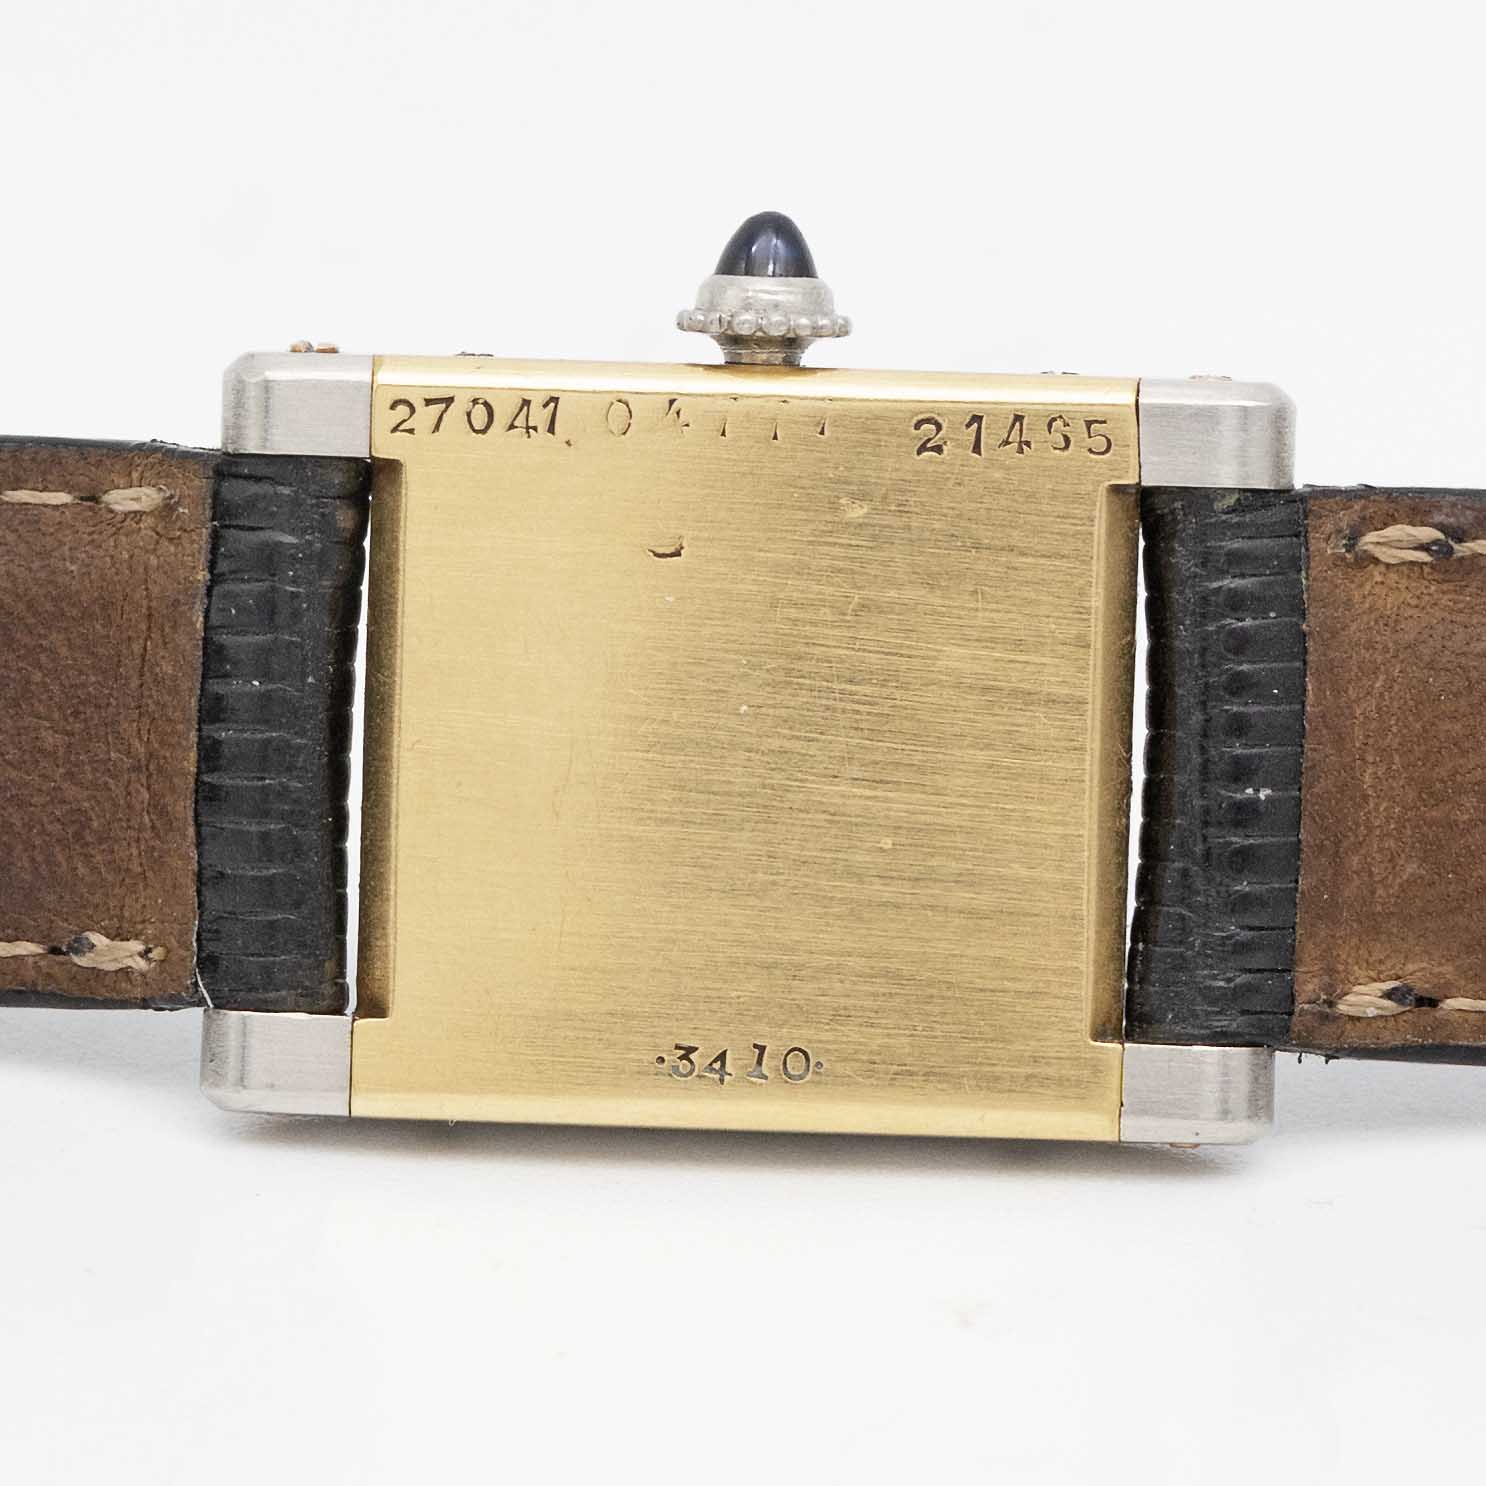 A FINE & VERY RARE PLATINUM & 18K SOLID GOLD CARTIER TANK NORMALE WRIST WATCH CIRCA 1929 Movement: - Image 7 of 11